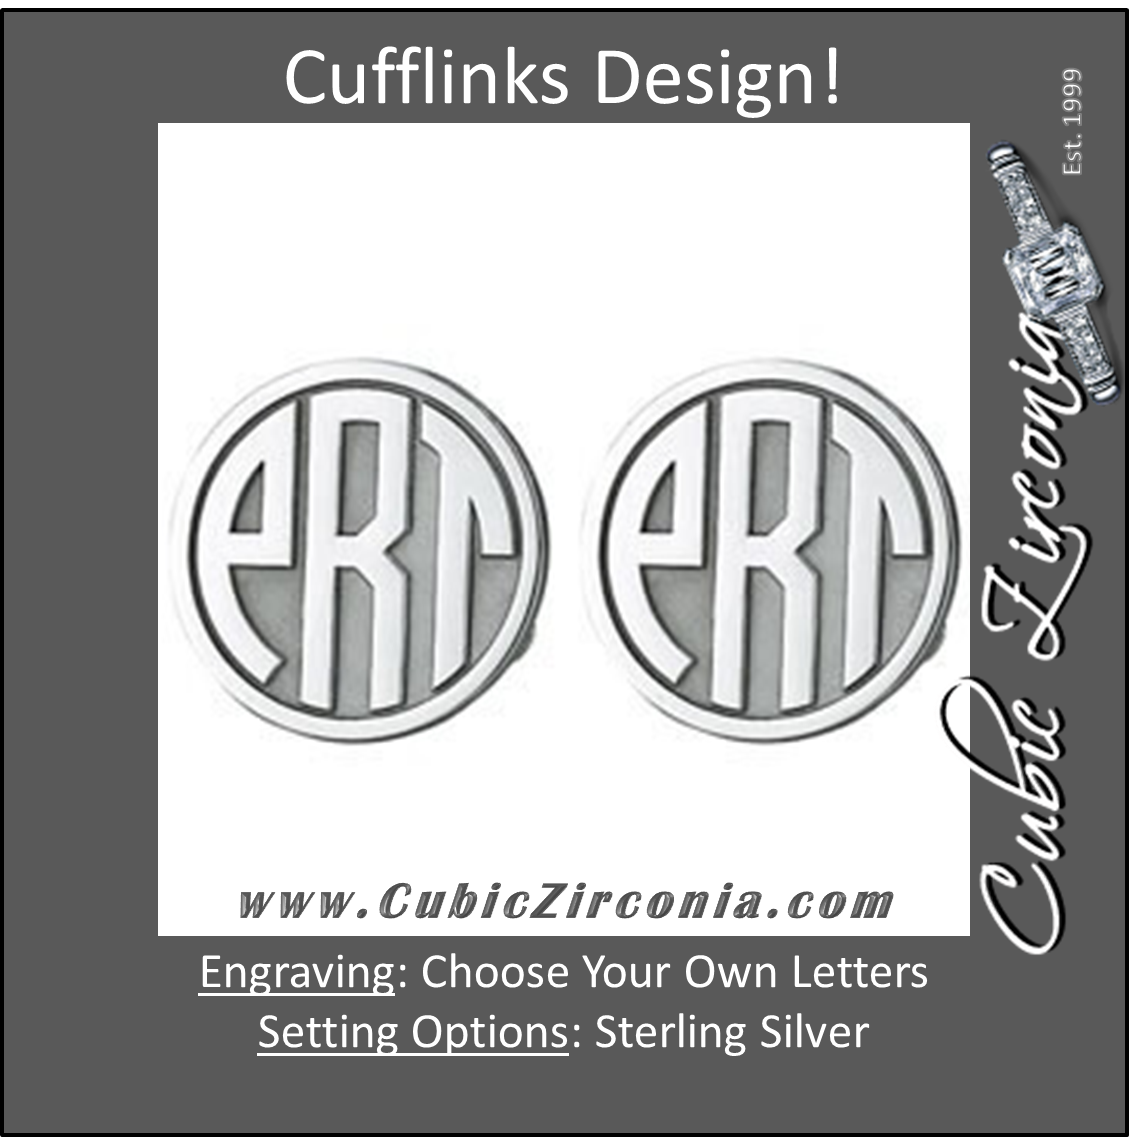 Men's Cufflinks- Customizable Monogram, Circle Style with Bubble Letters